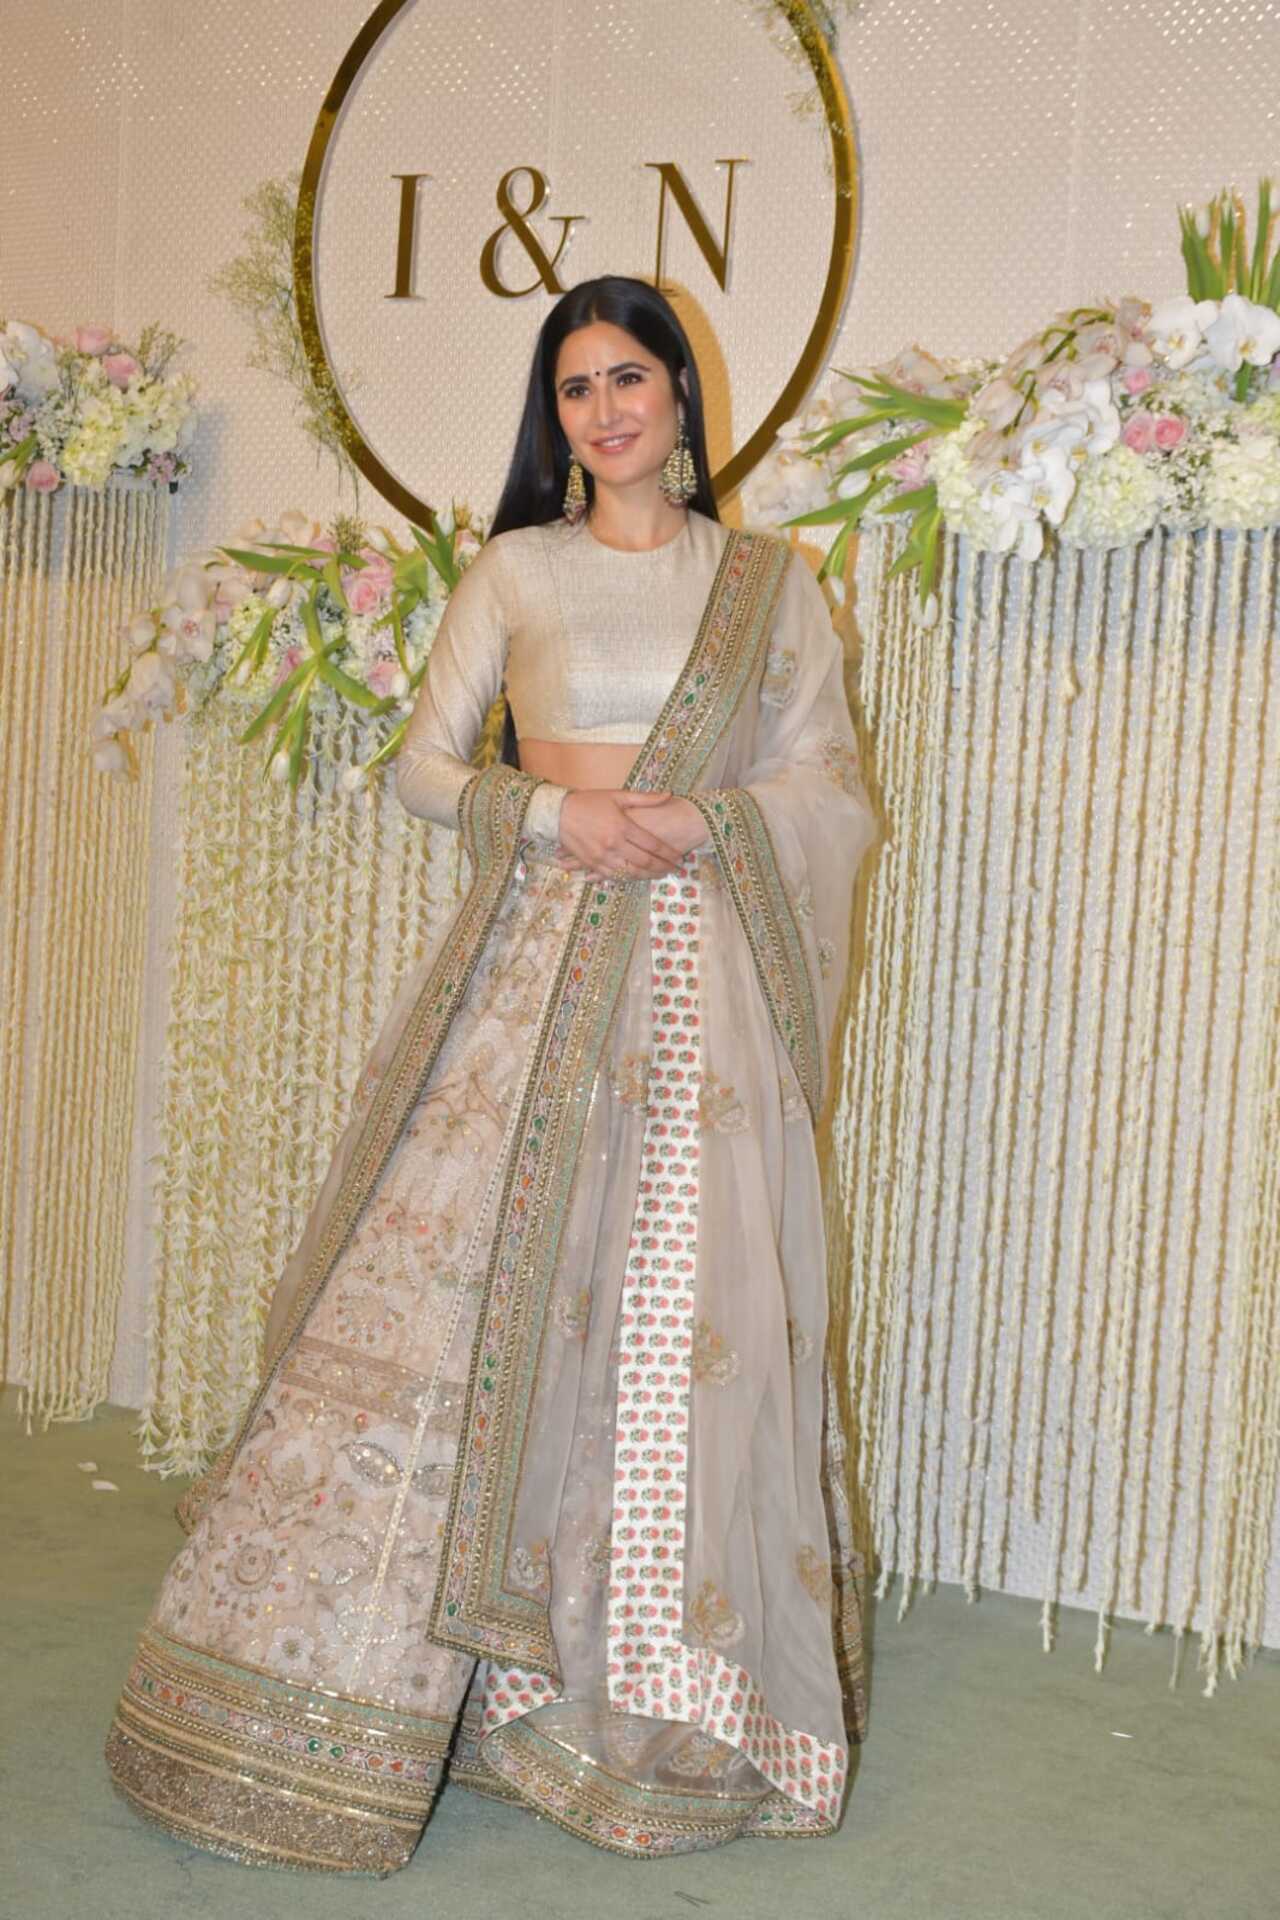 Katrina Kaif gave the princess vibe in this gorgeous off-white lehenga. She kept her hair straight and opted for subtle makeup